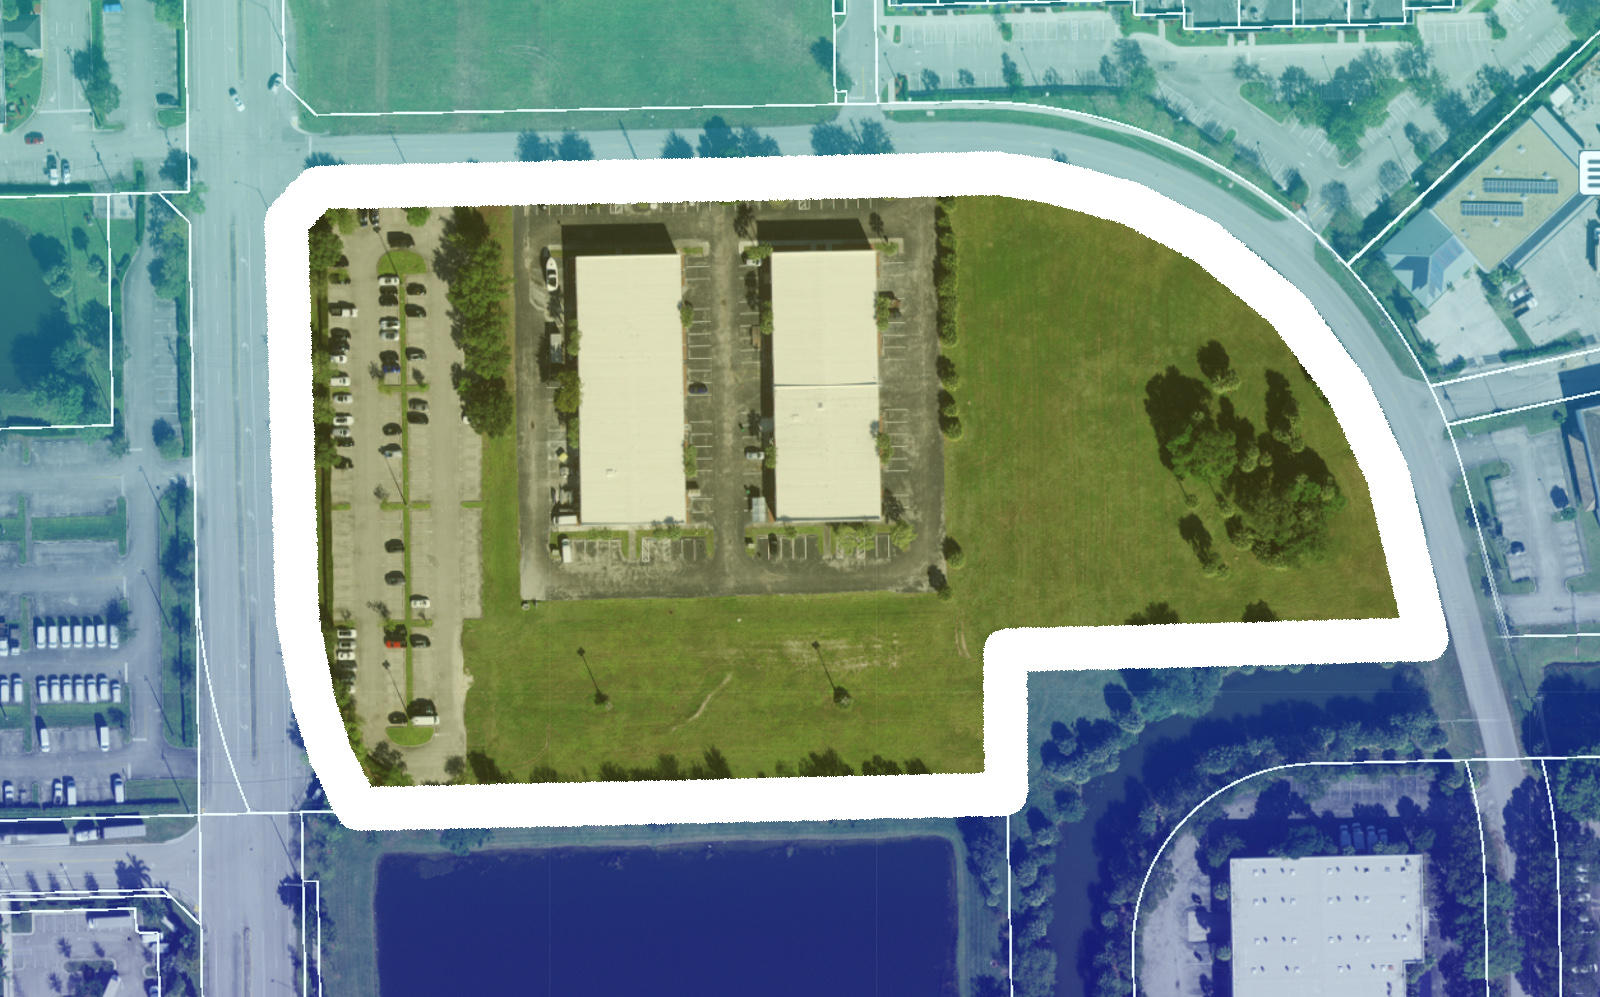 The lot of space at Pompano Beach. (Broward County)